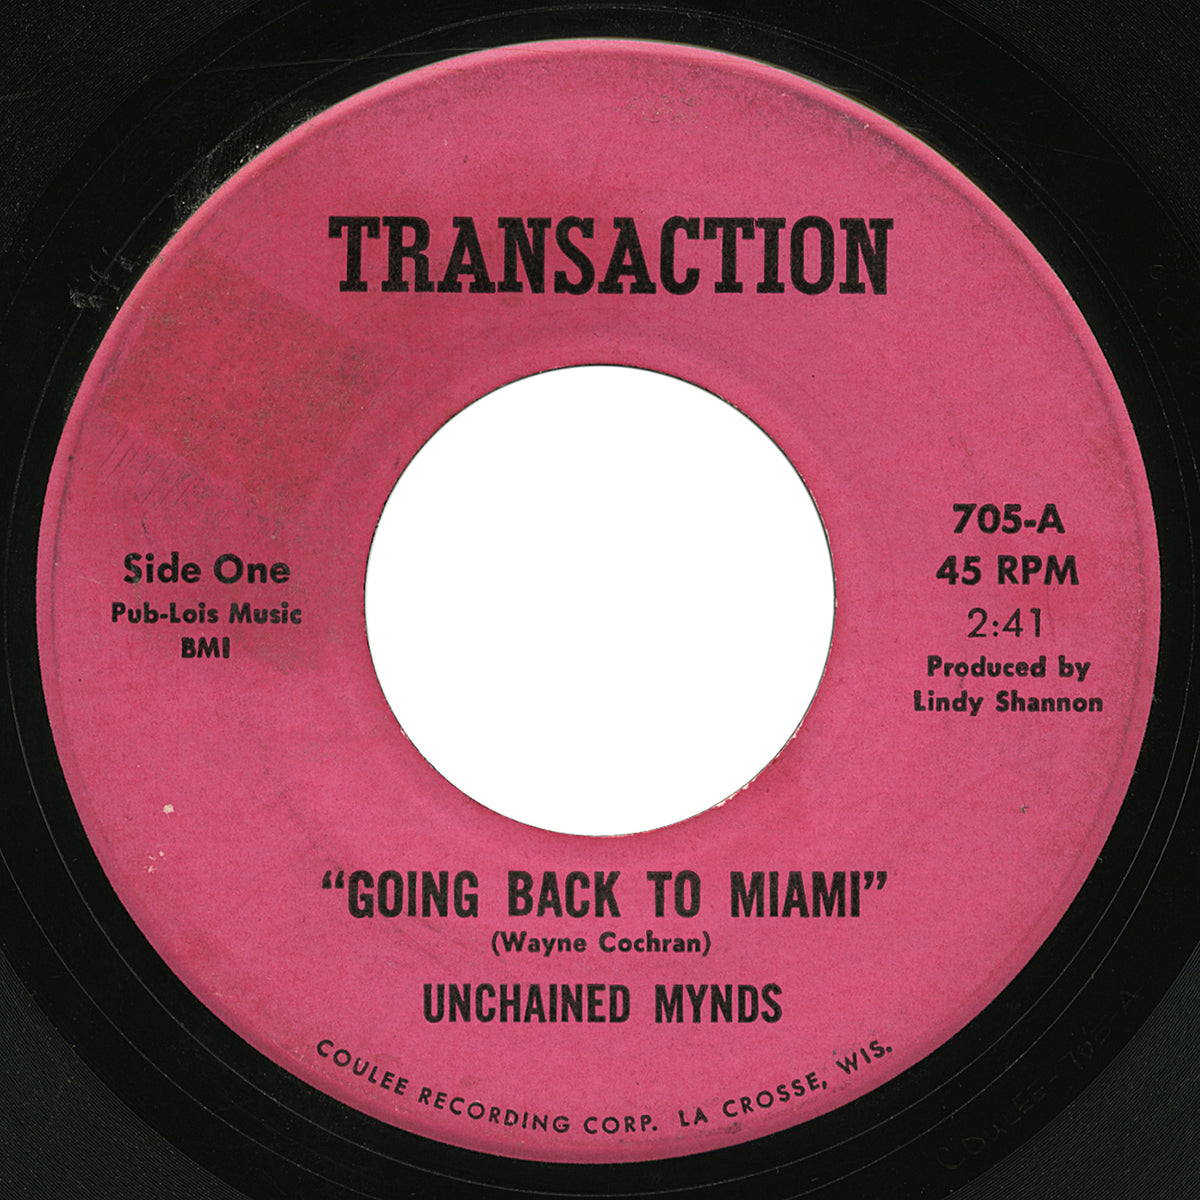 Unchained Mynds – Going Back To Miami – Transaction